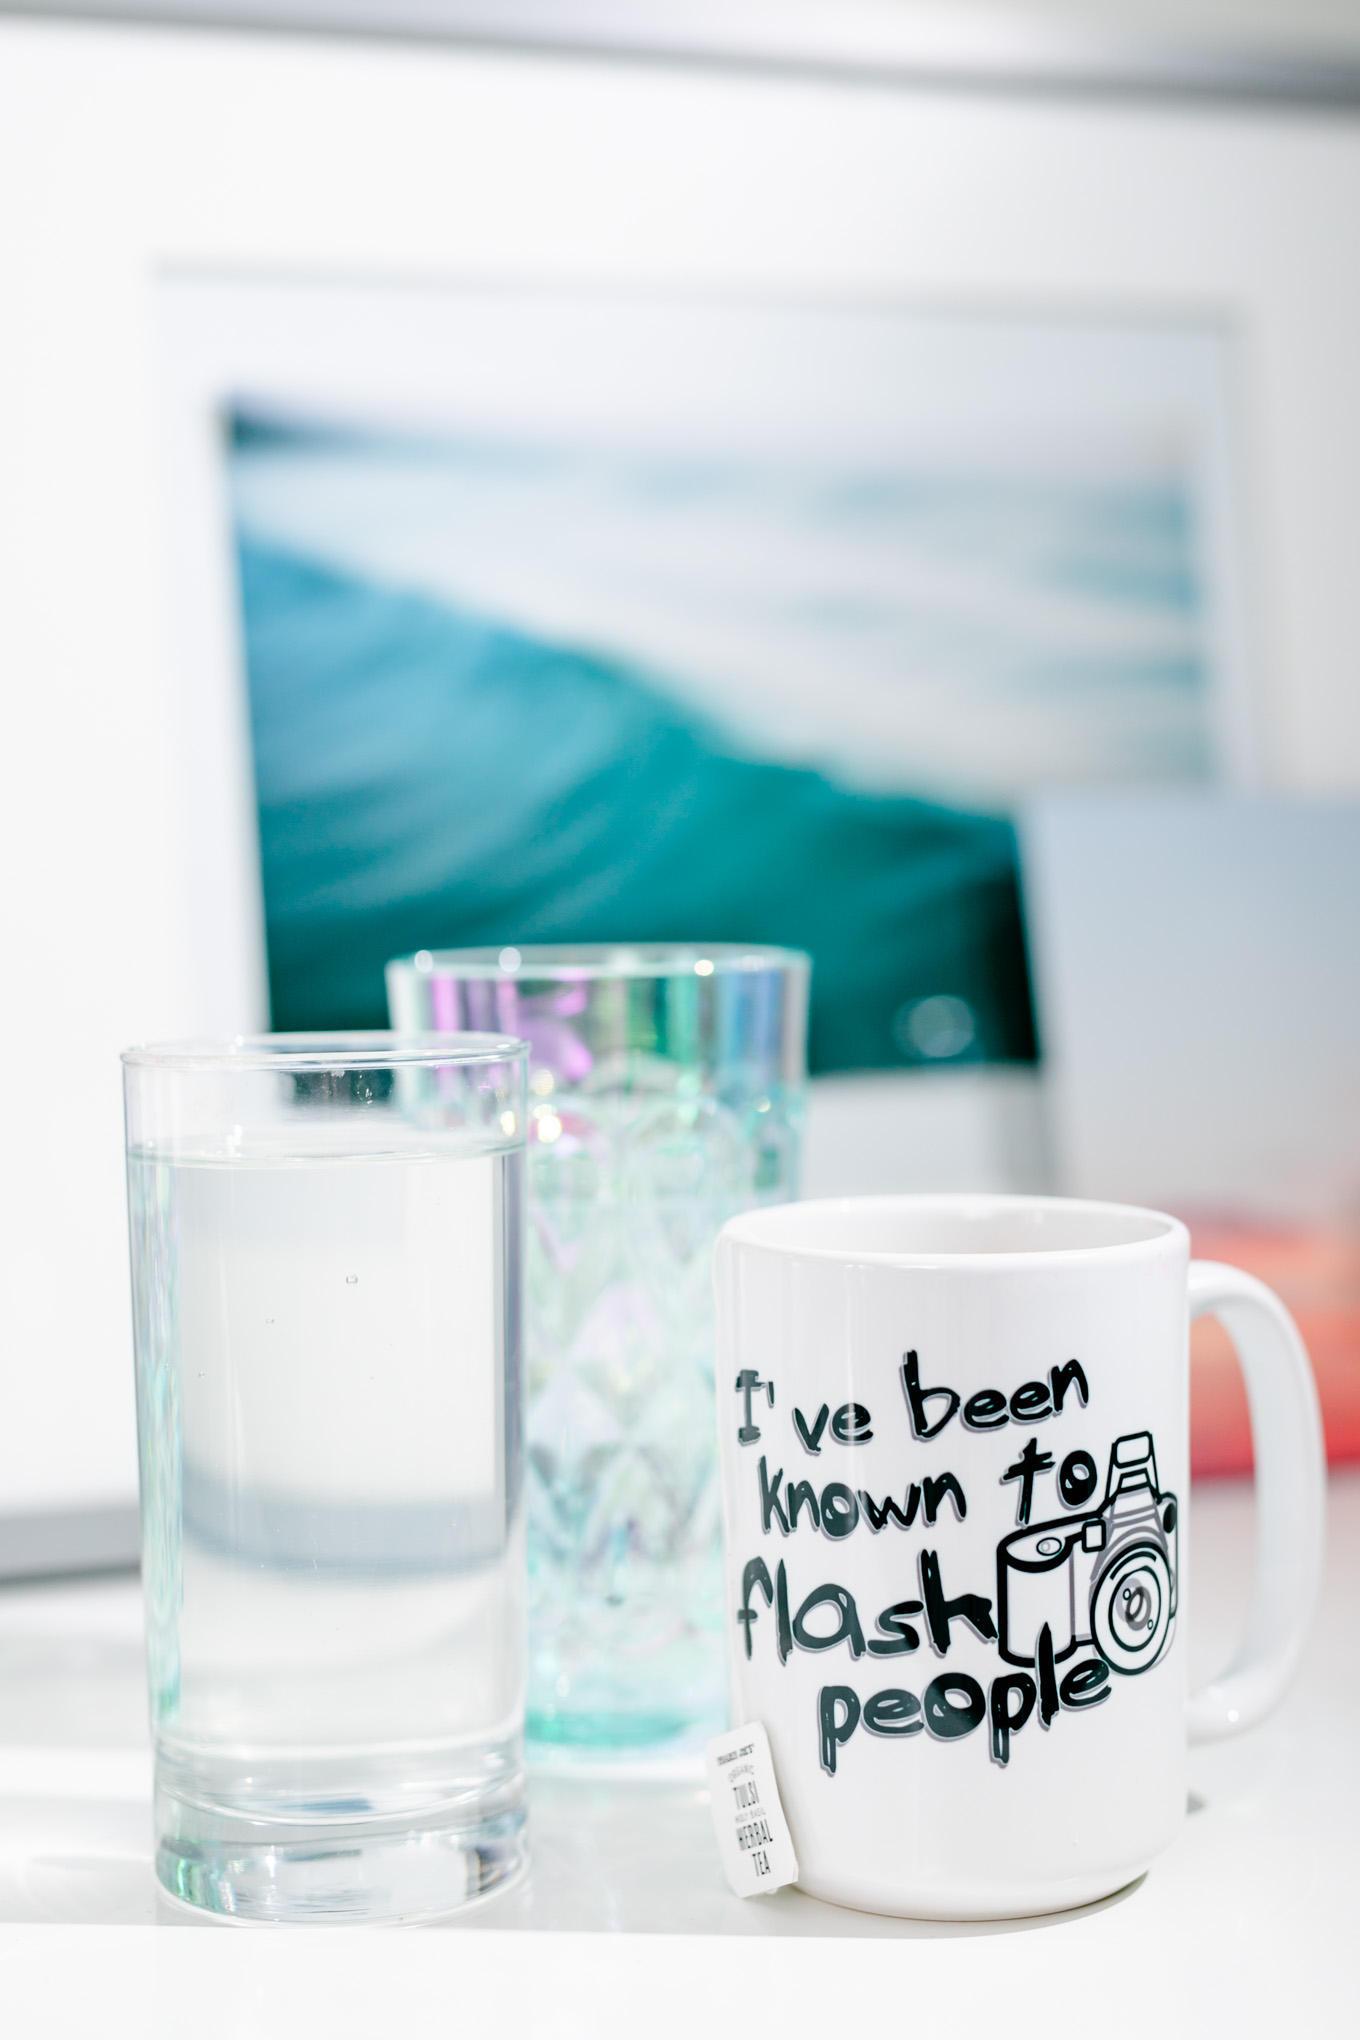 work from home tips, working from home, working from home ideas, white desk, entrepreneur ideas, entrepreneur planning, entrepreneur life, work from home goals, photographer's life, solopreneur, social distancing, self quarantine, COVID-19, Rachel E.H. Photography, behind the scenes, home office, home office setup, novelty mug